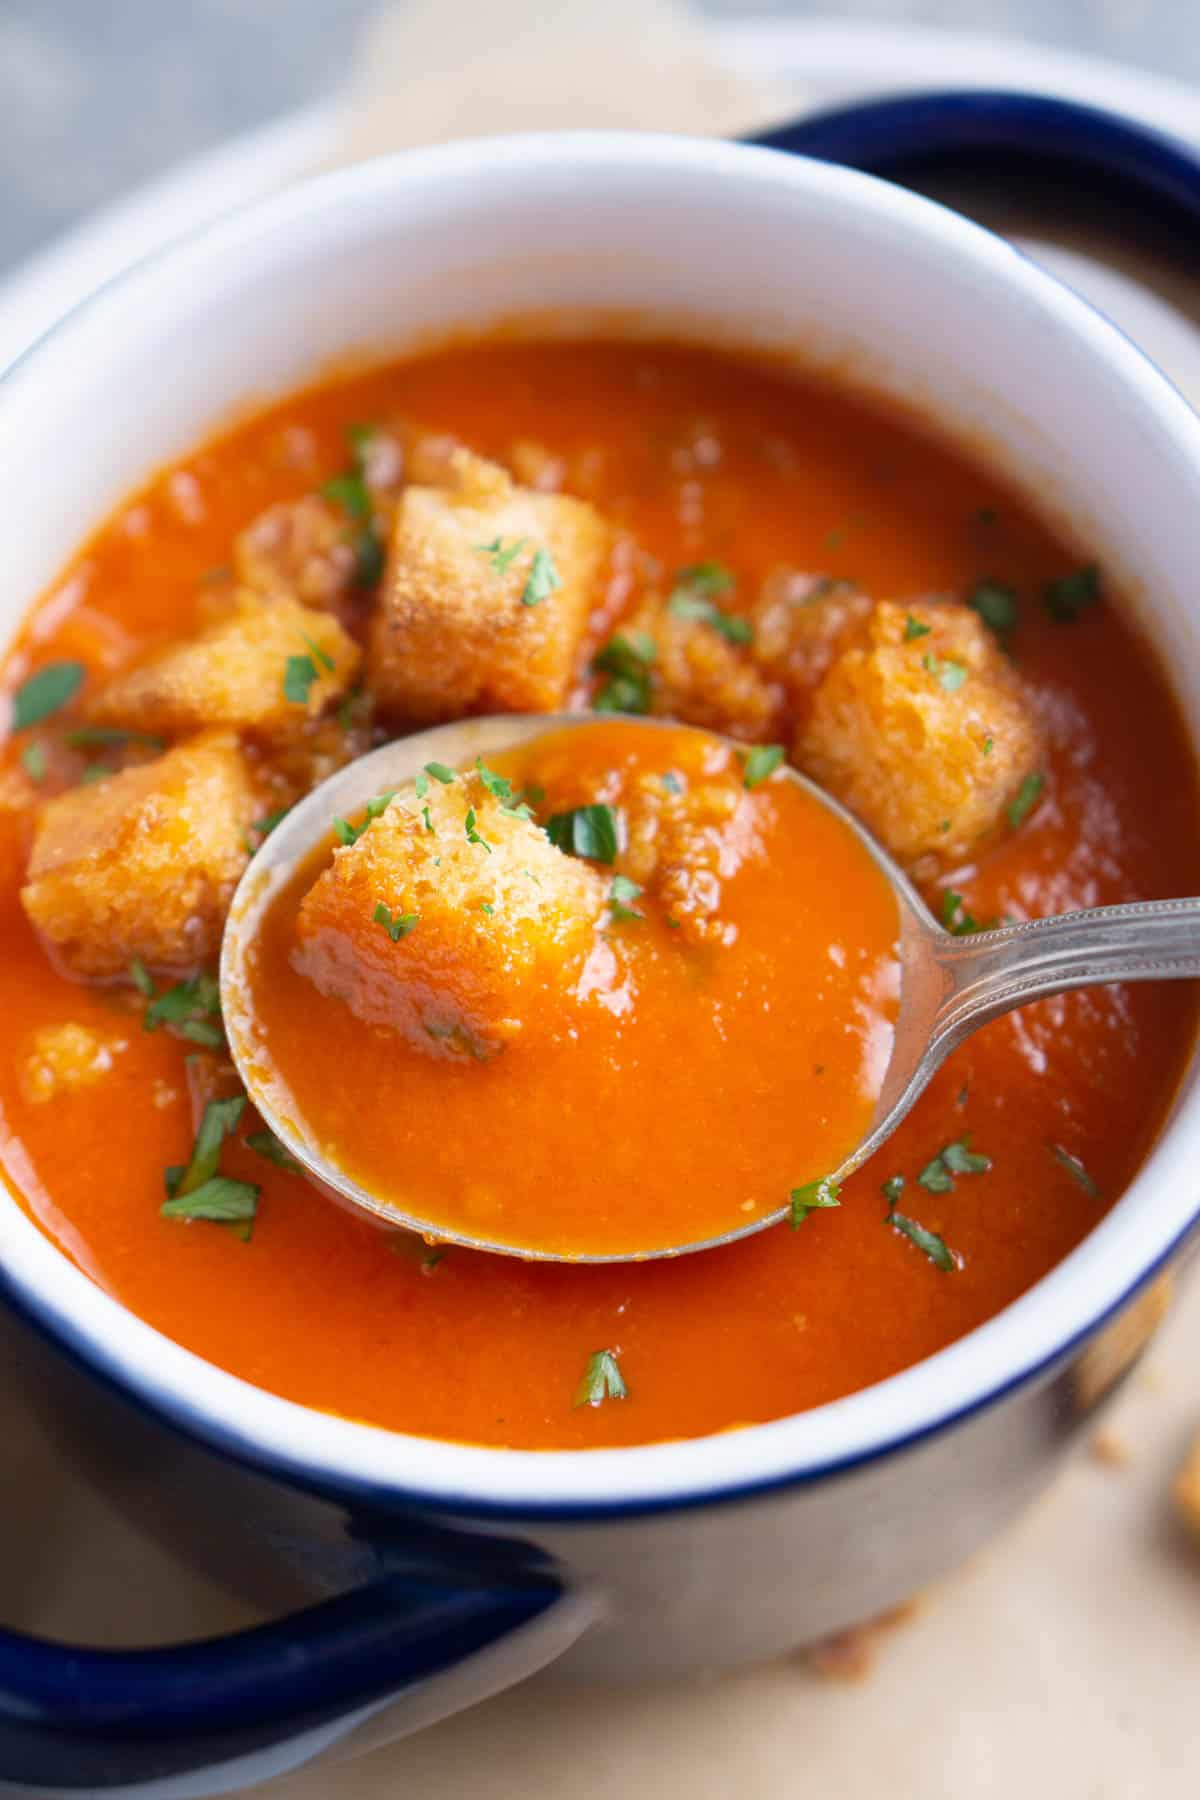 soup spoon lifts tomato soup from blue and white crock topped with croutons and parsley